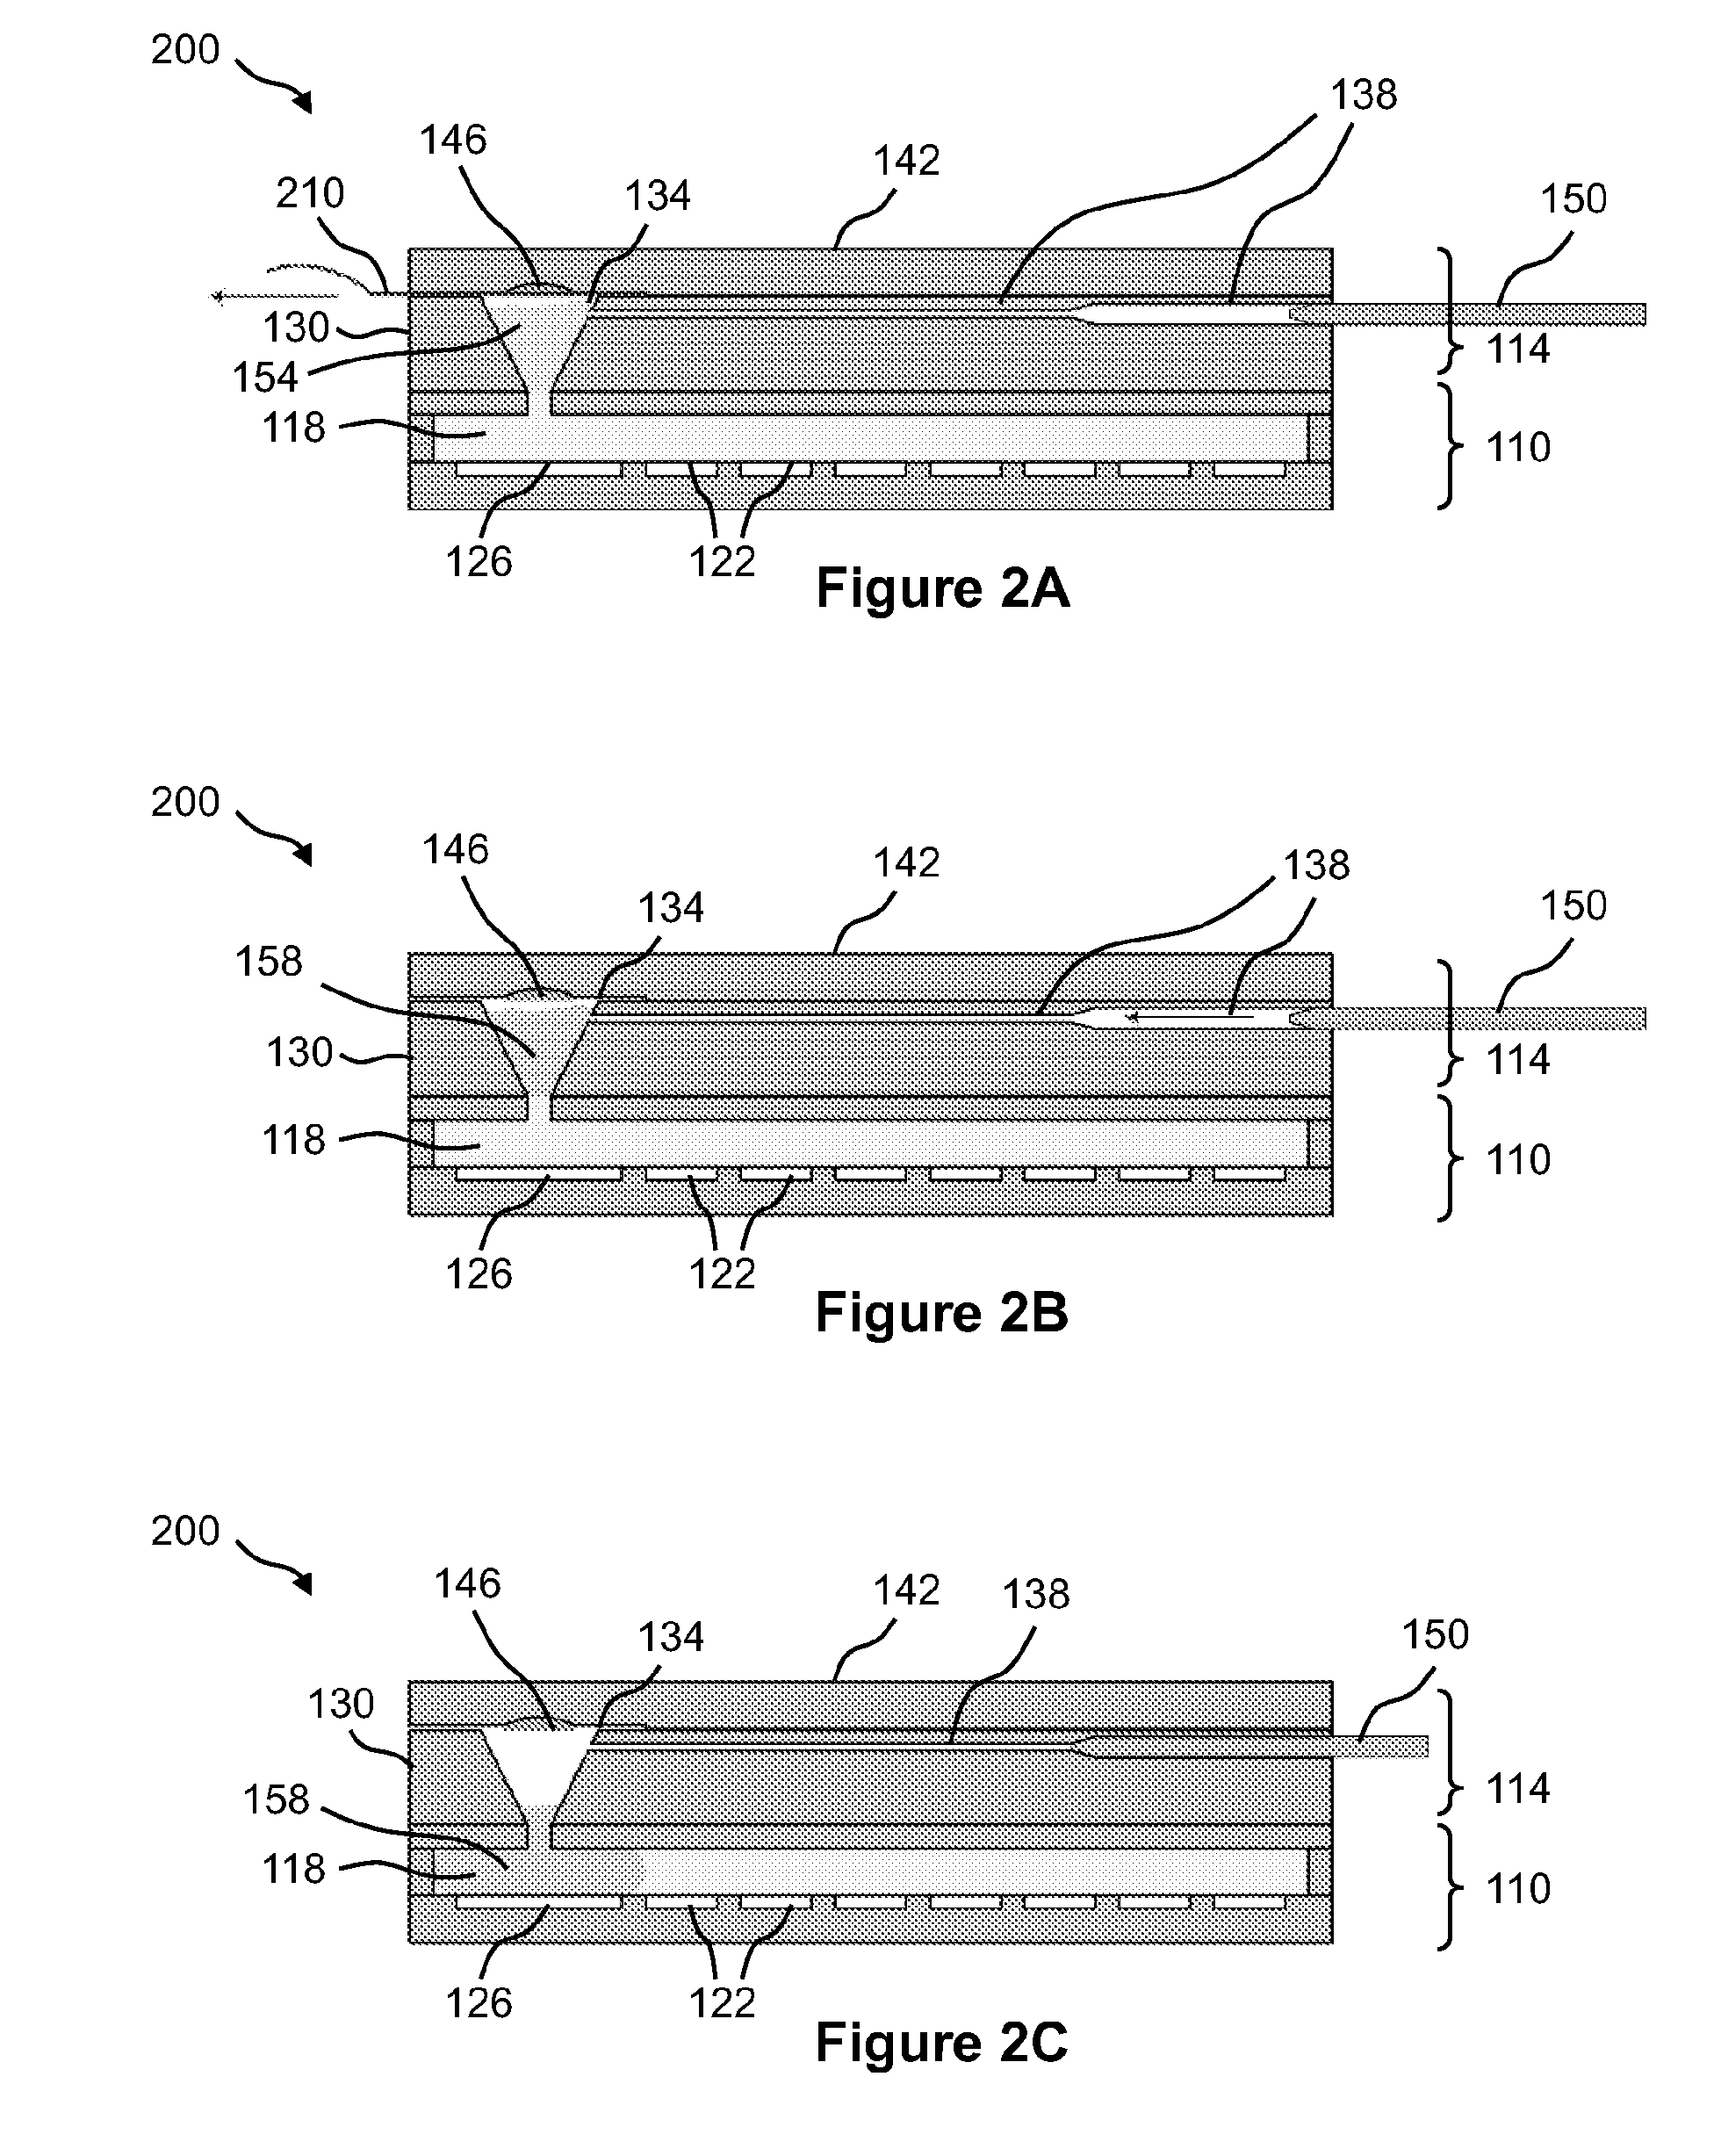 Reagent Storage and Reconstitution for a Droplet Actuator